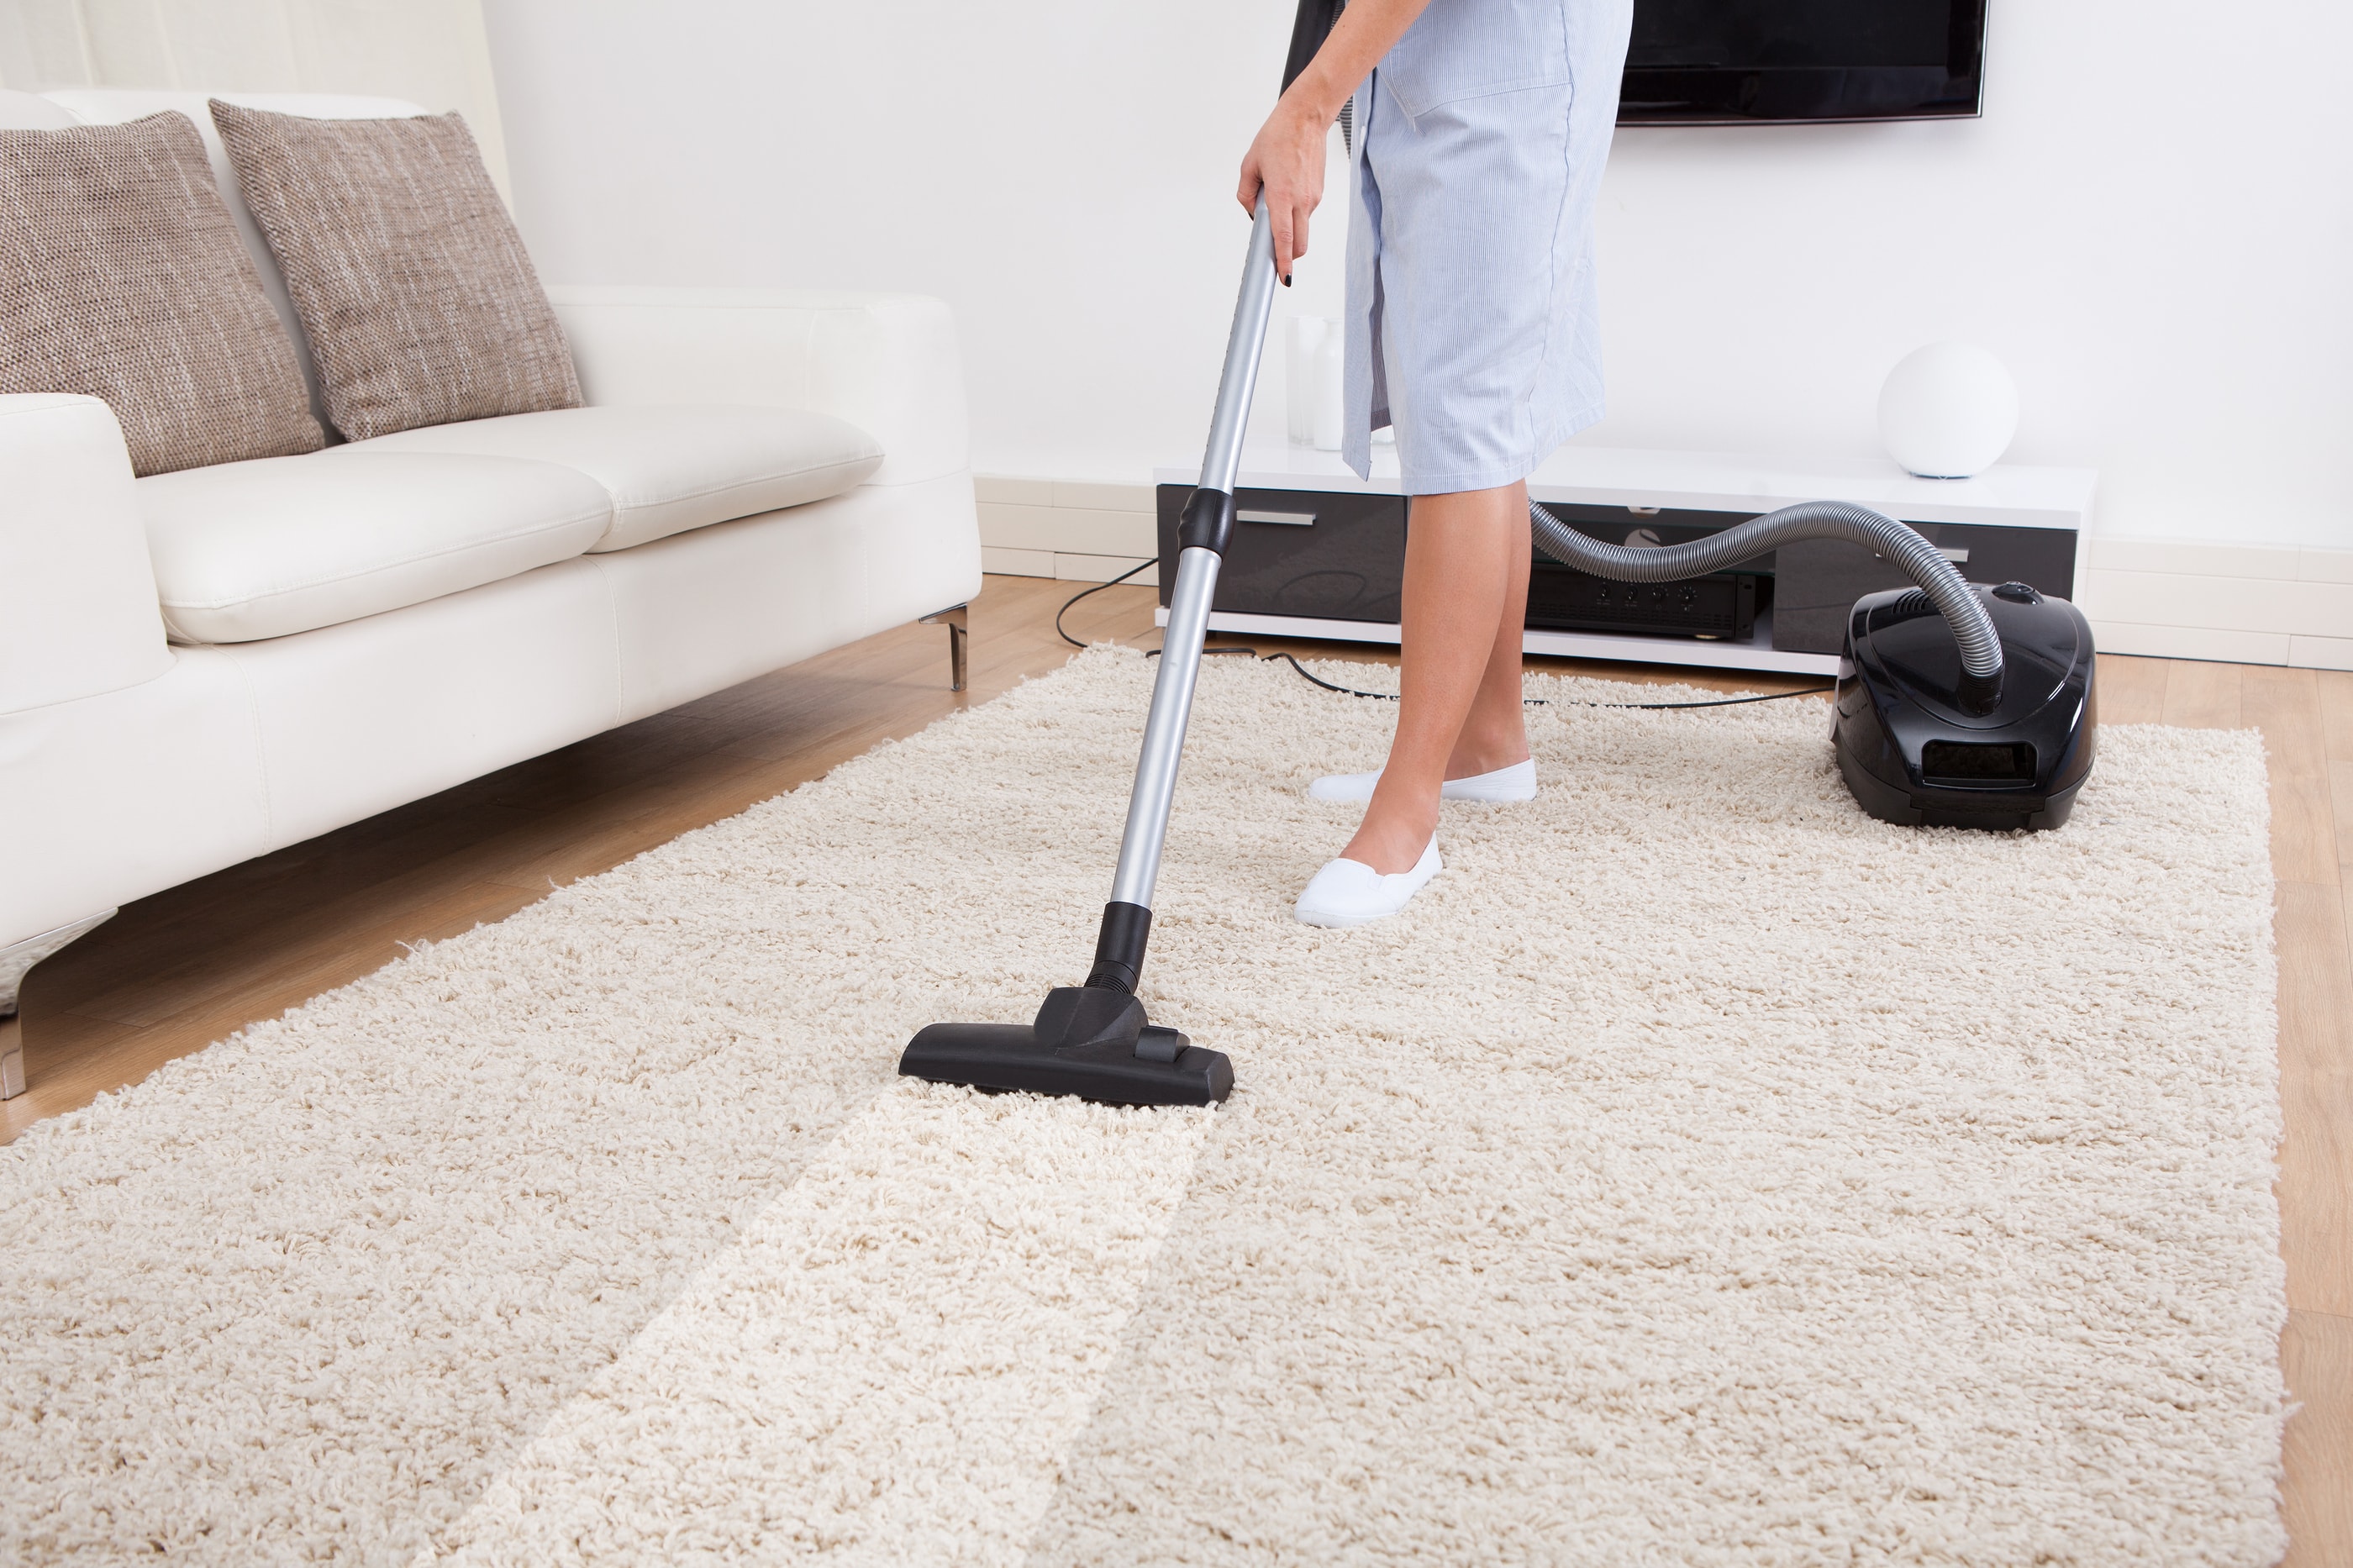 We Offer The Most Comprehensive Carpet Cleaning Services In Prescott!